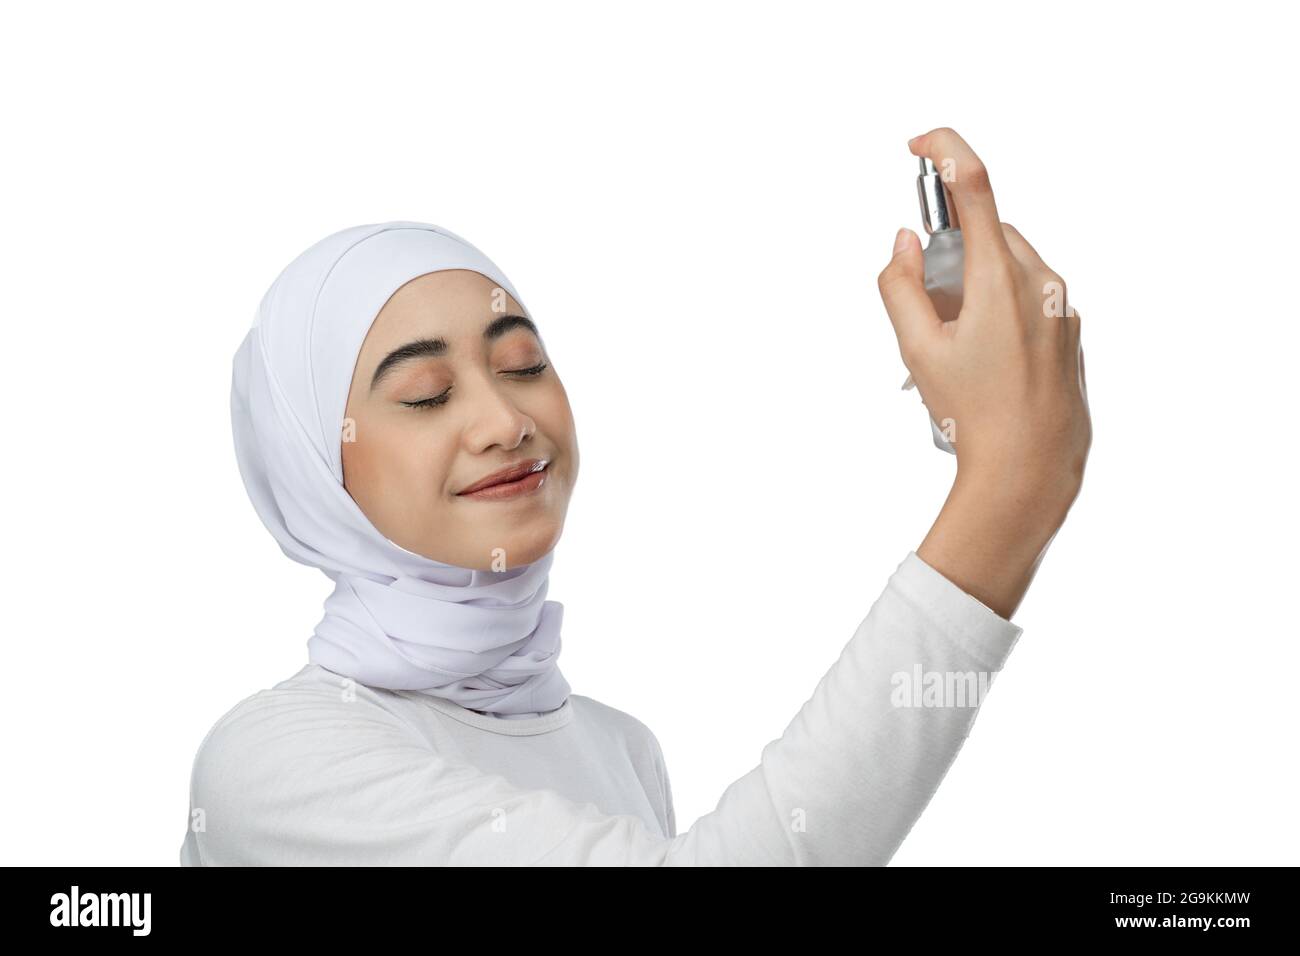 Excited asian hijab woman wearing white dress squirts a bottle of facial  care serum Stock Photo - Alamy